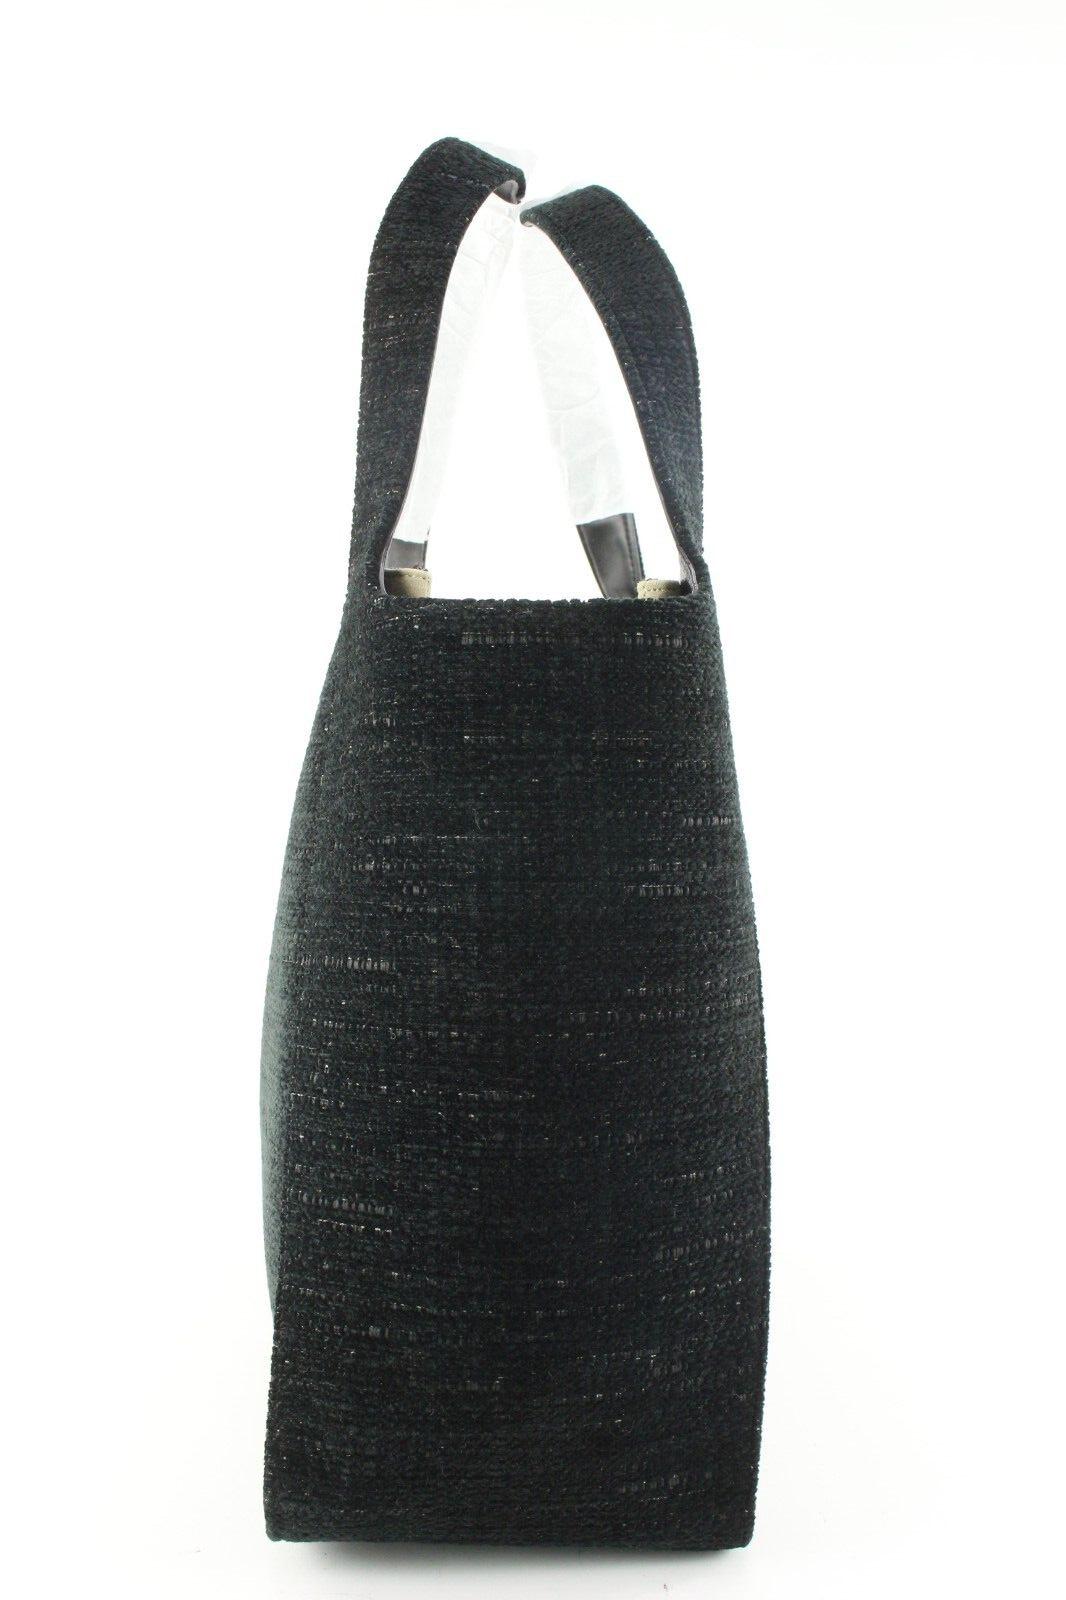 Stella Mccartney Black Raffia Circle Logo Tote with Pouch 1SM0501 In New Condition For Sale In Dix hills, NY